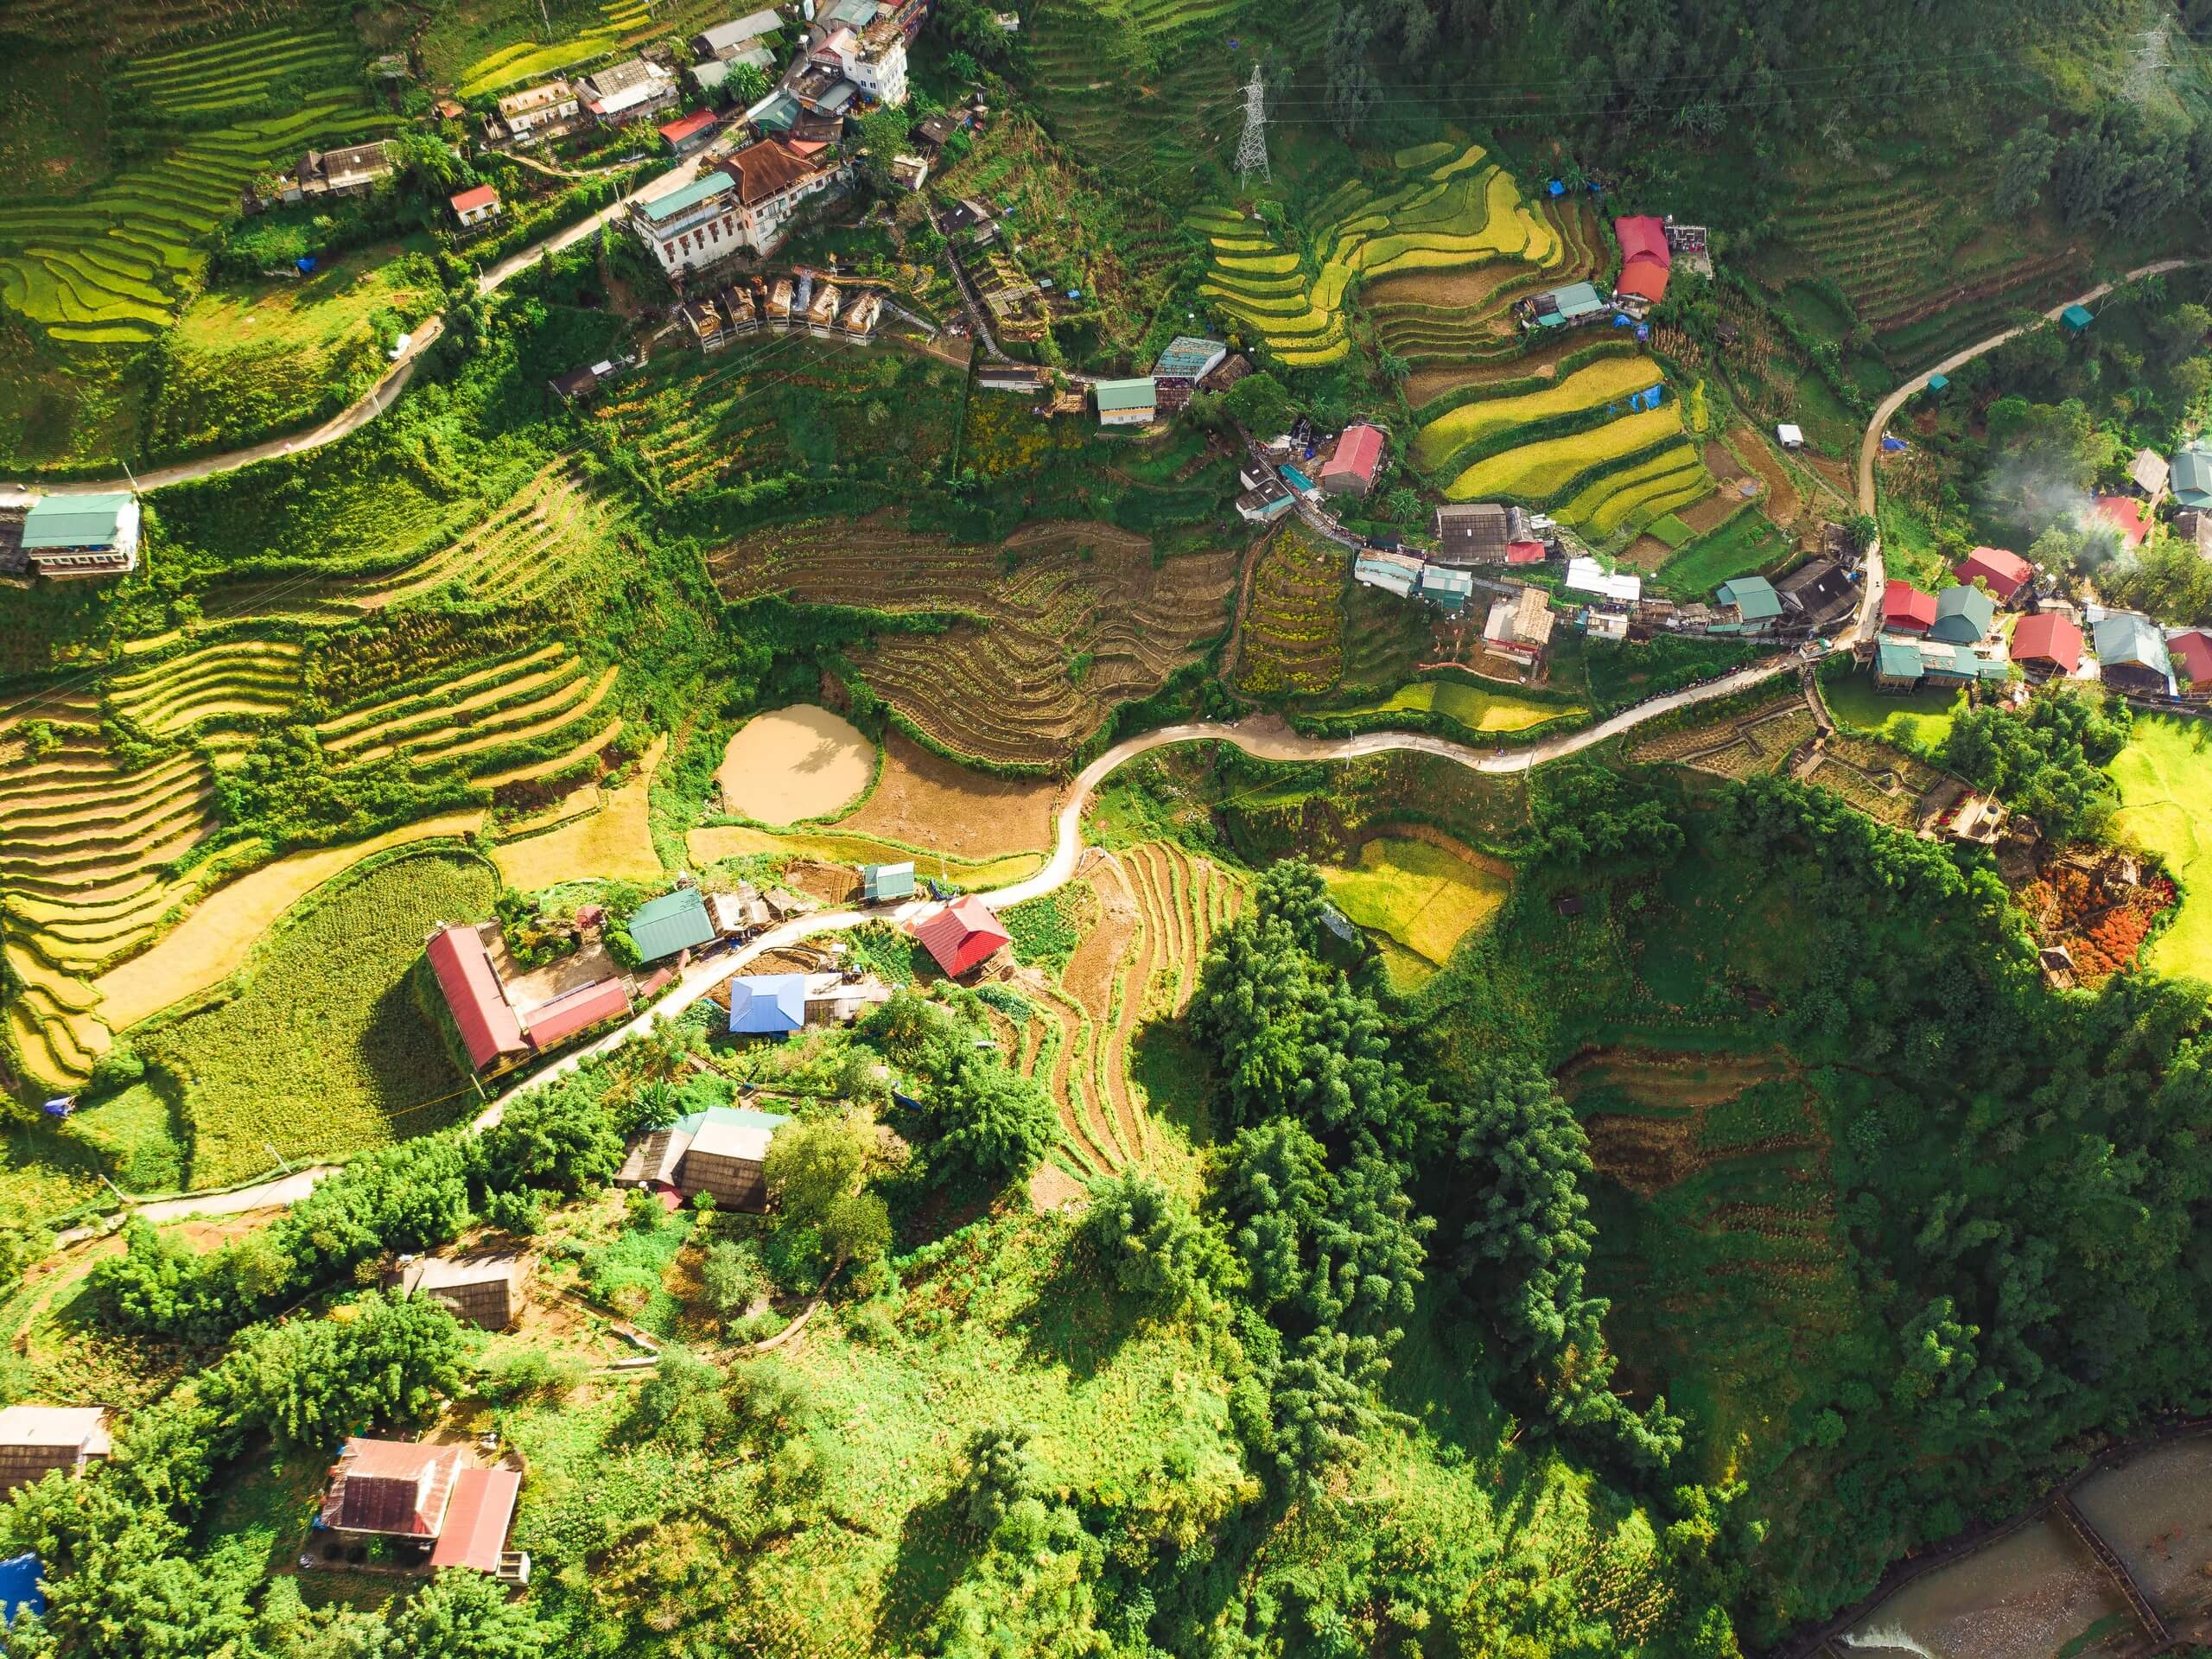 Sapa valley as seen from the above